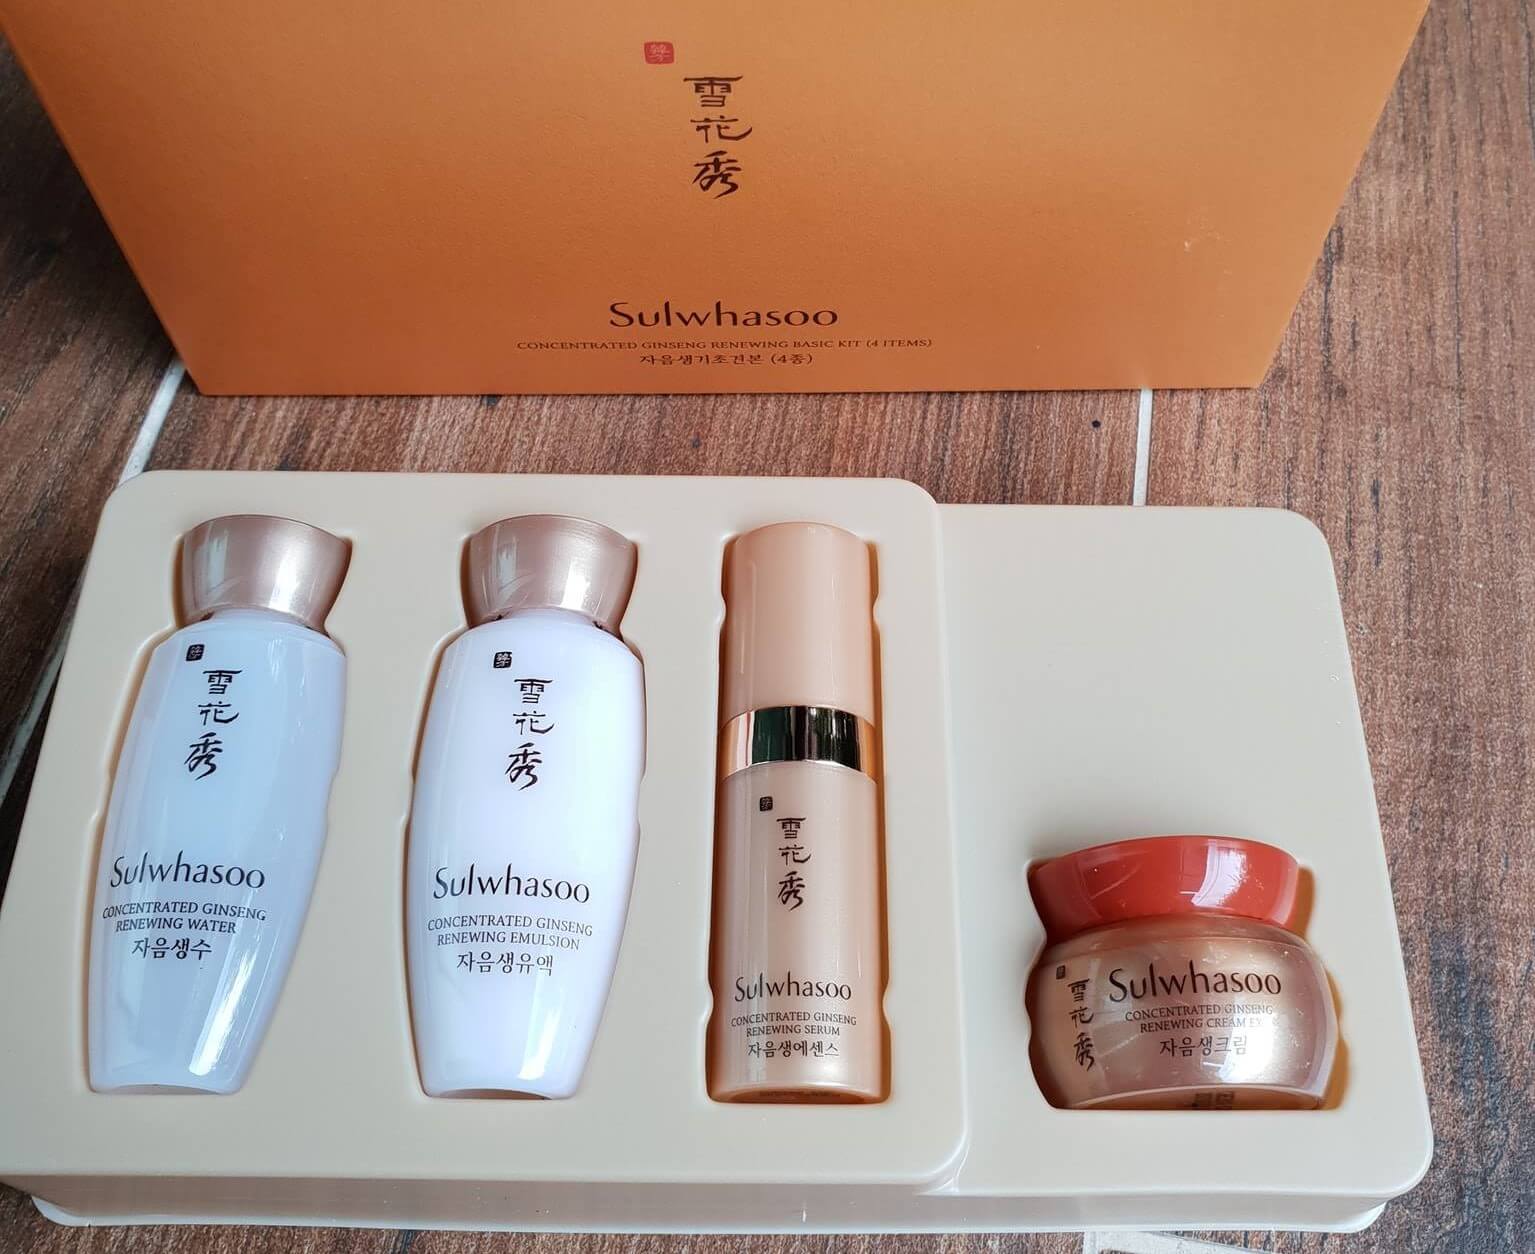 Sulwhasoo Concentrate Ginseng Renewing basic kit ( 4 item),Sulwhasoo Concentrate Ginseng Renewing kit ราคา,Sulwhasoo Concentrate Ginseng Renewing kit ออนไลน์,Sulwhasoo Concentrate Ginseng ของแท้